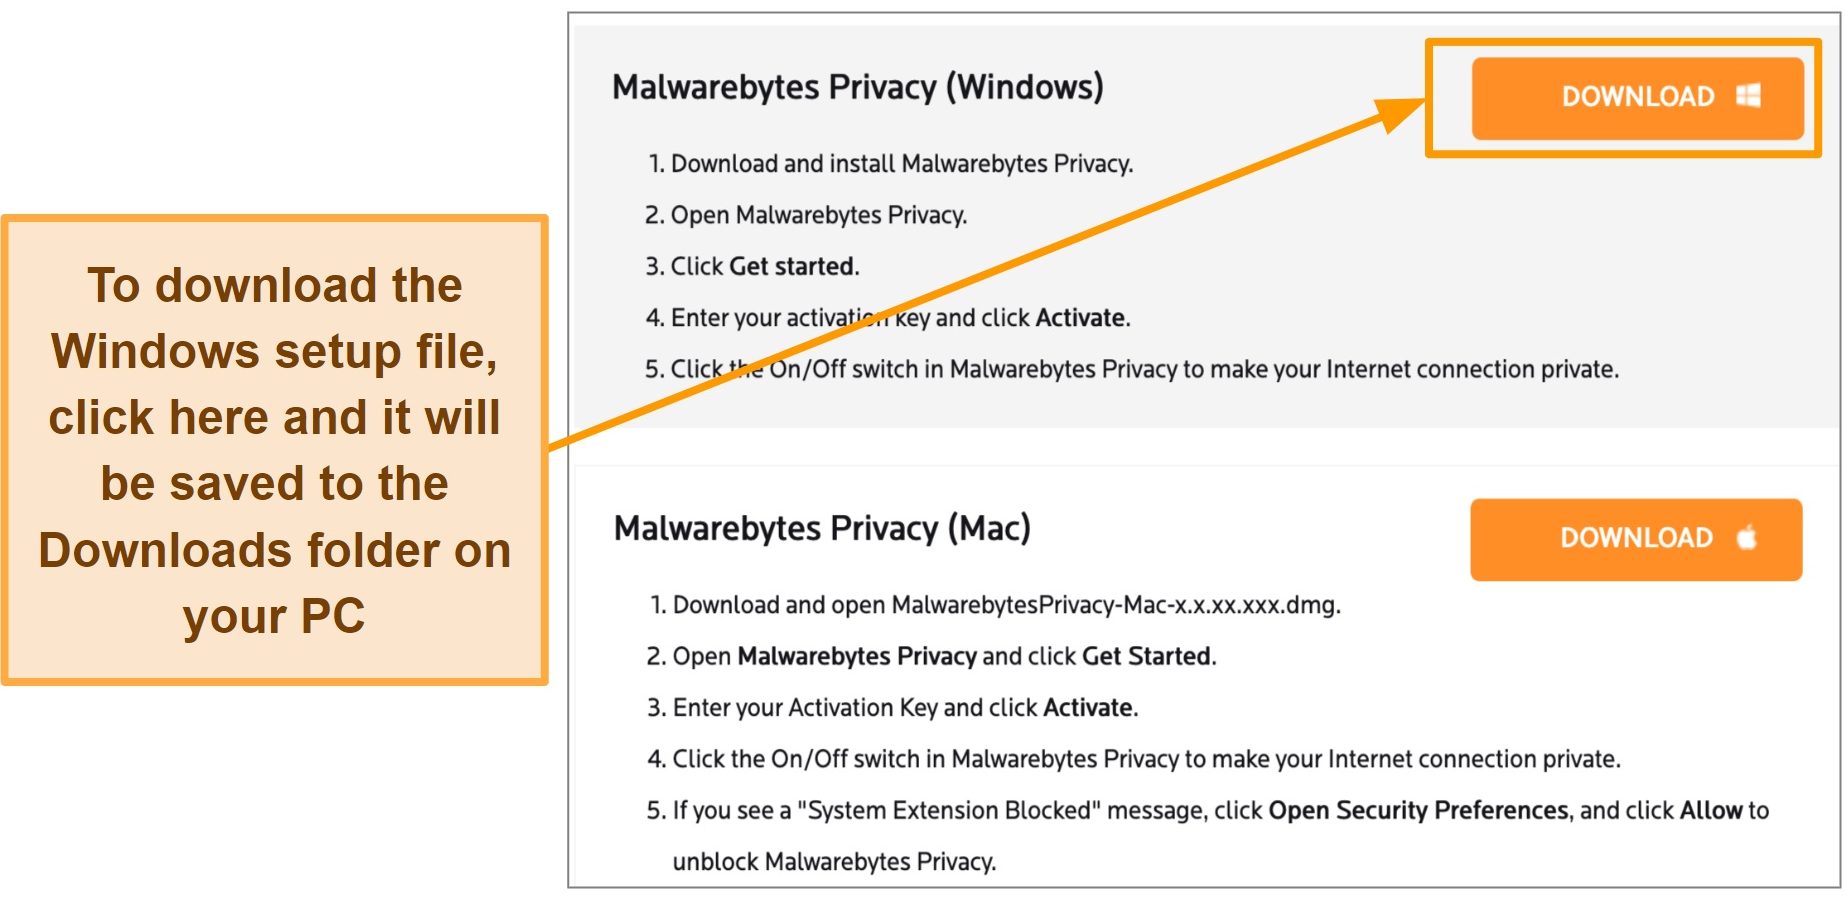 Screenshot of Malwarebytes Privacy's download page for Windows device